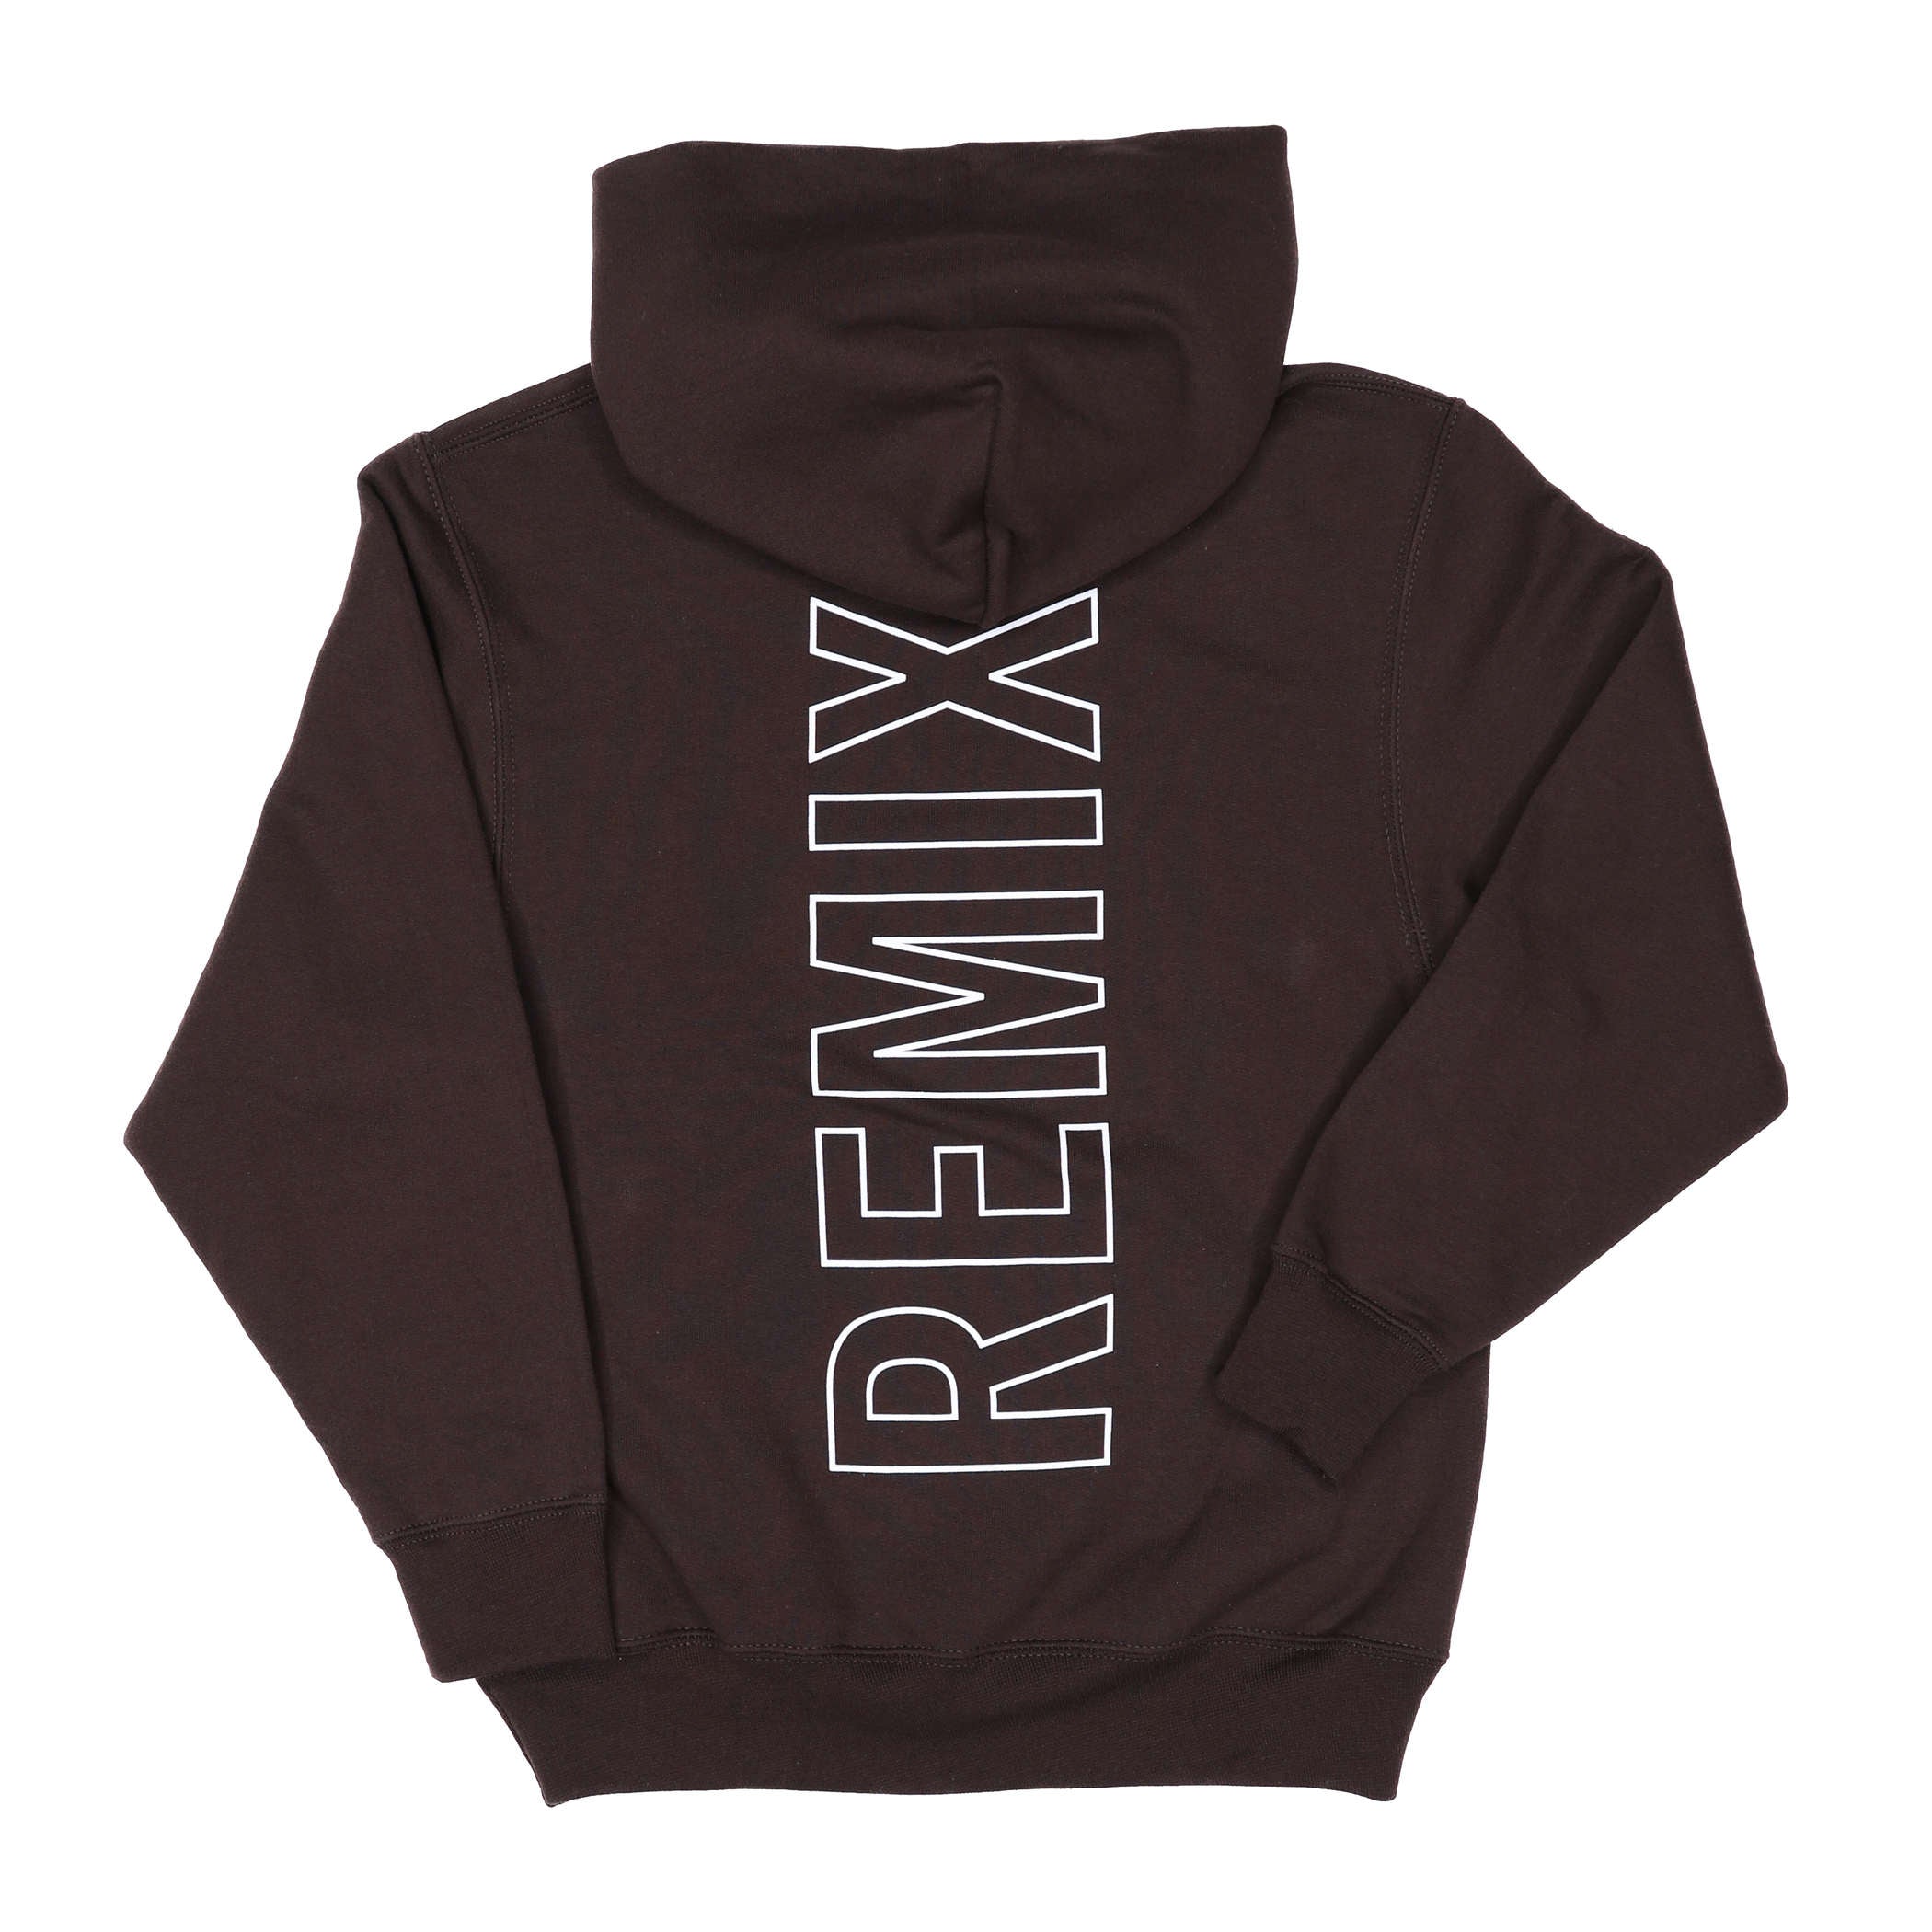 Rip City Remix Ballin Youth Brown Hoodie - Youth S - 